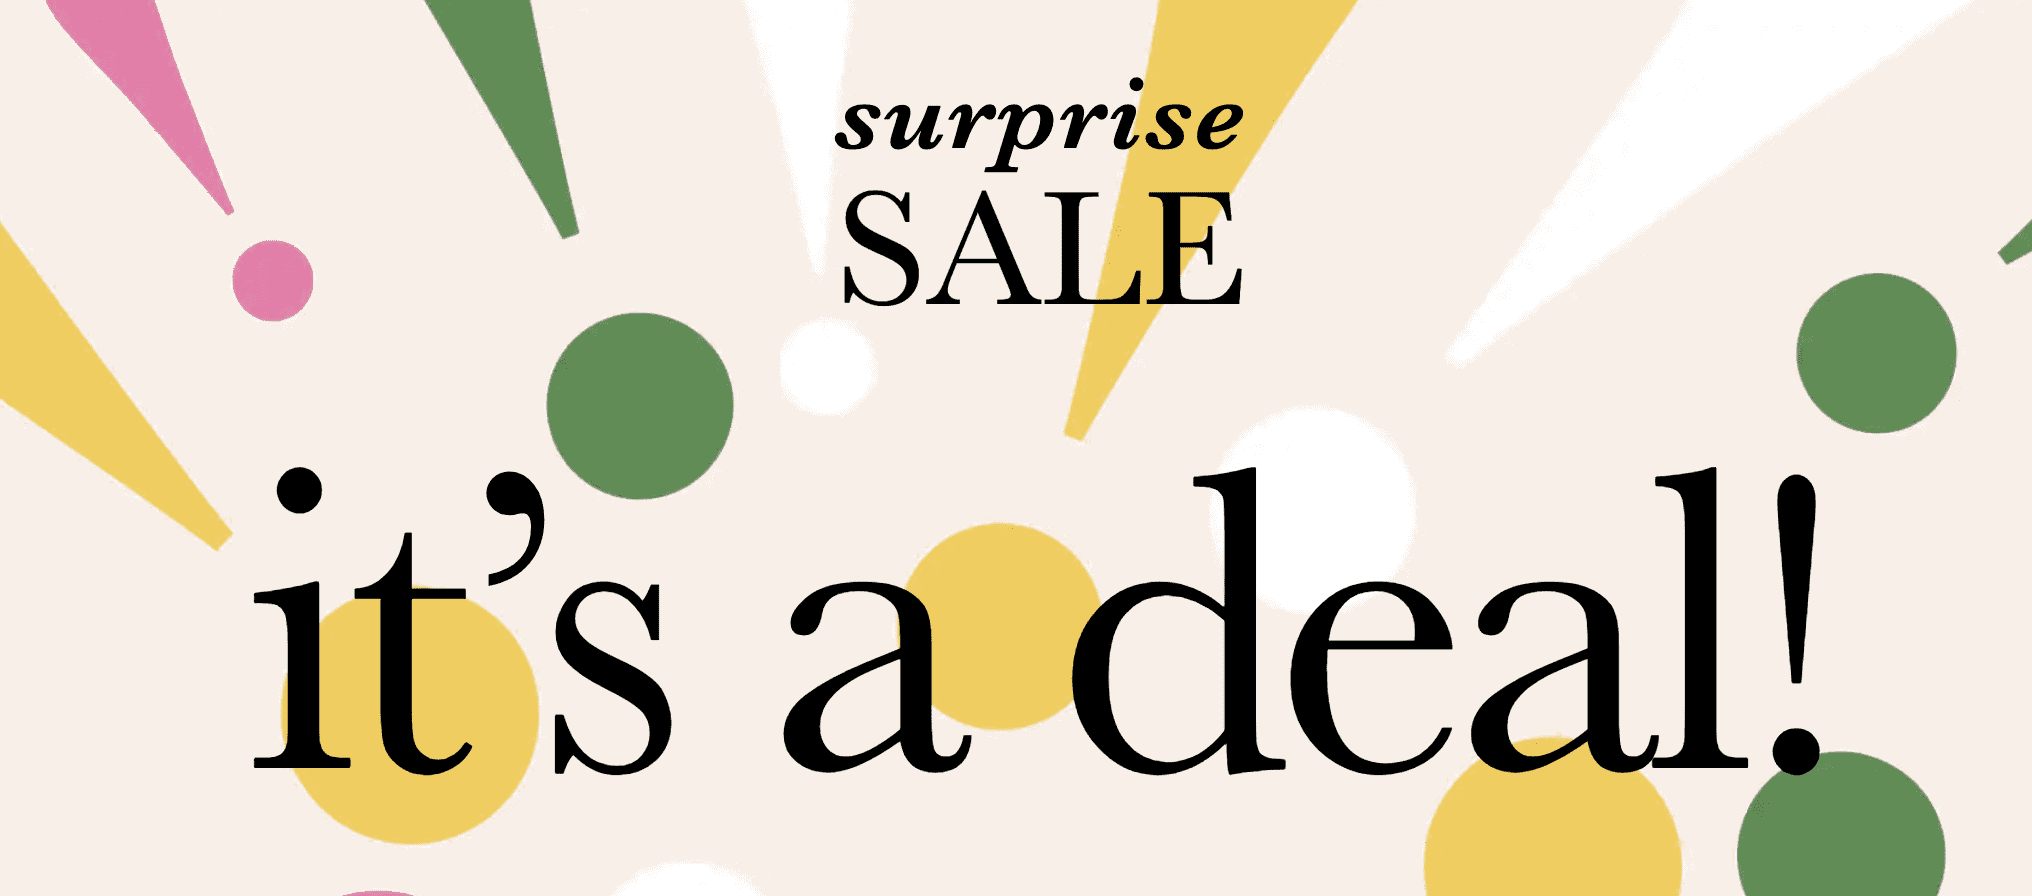 Kate Spade's Surprise Holiday Sale: Save Up to 75% Off Everything!